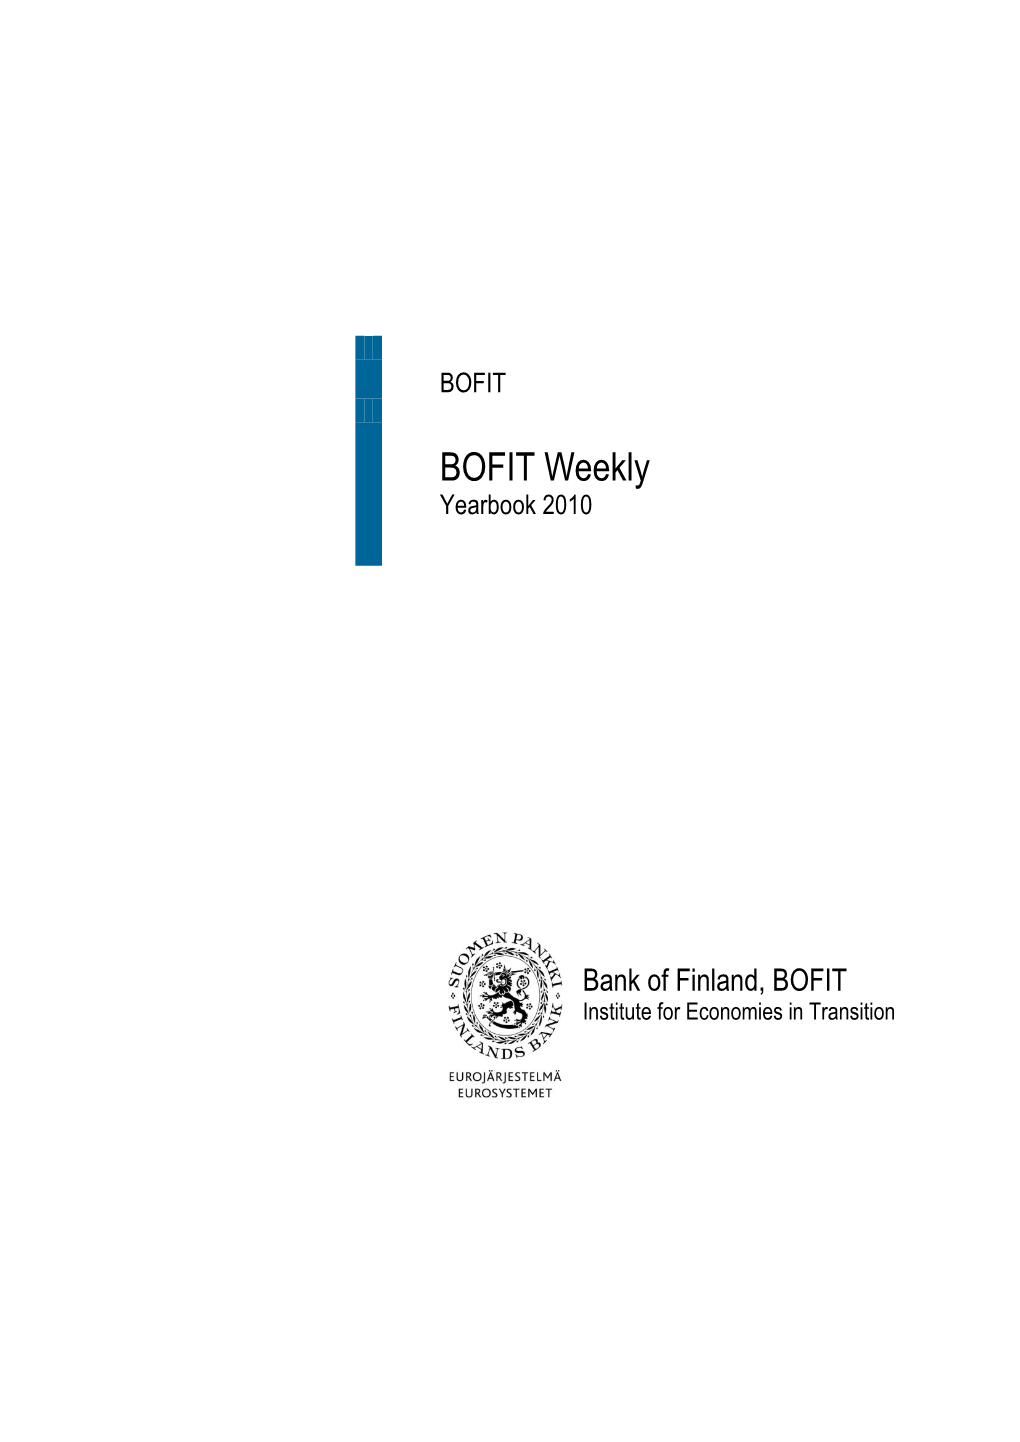 BOFIT Weekly Yearbook 2010